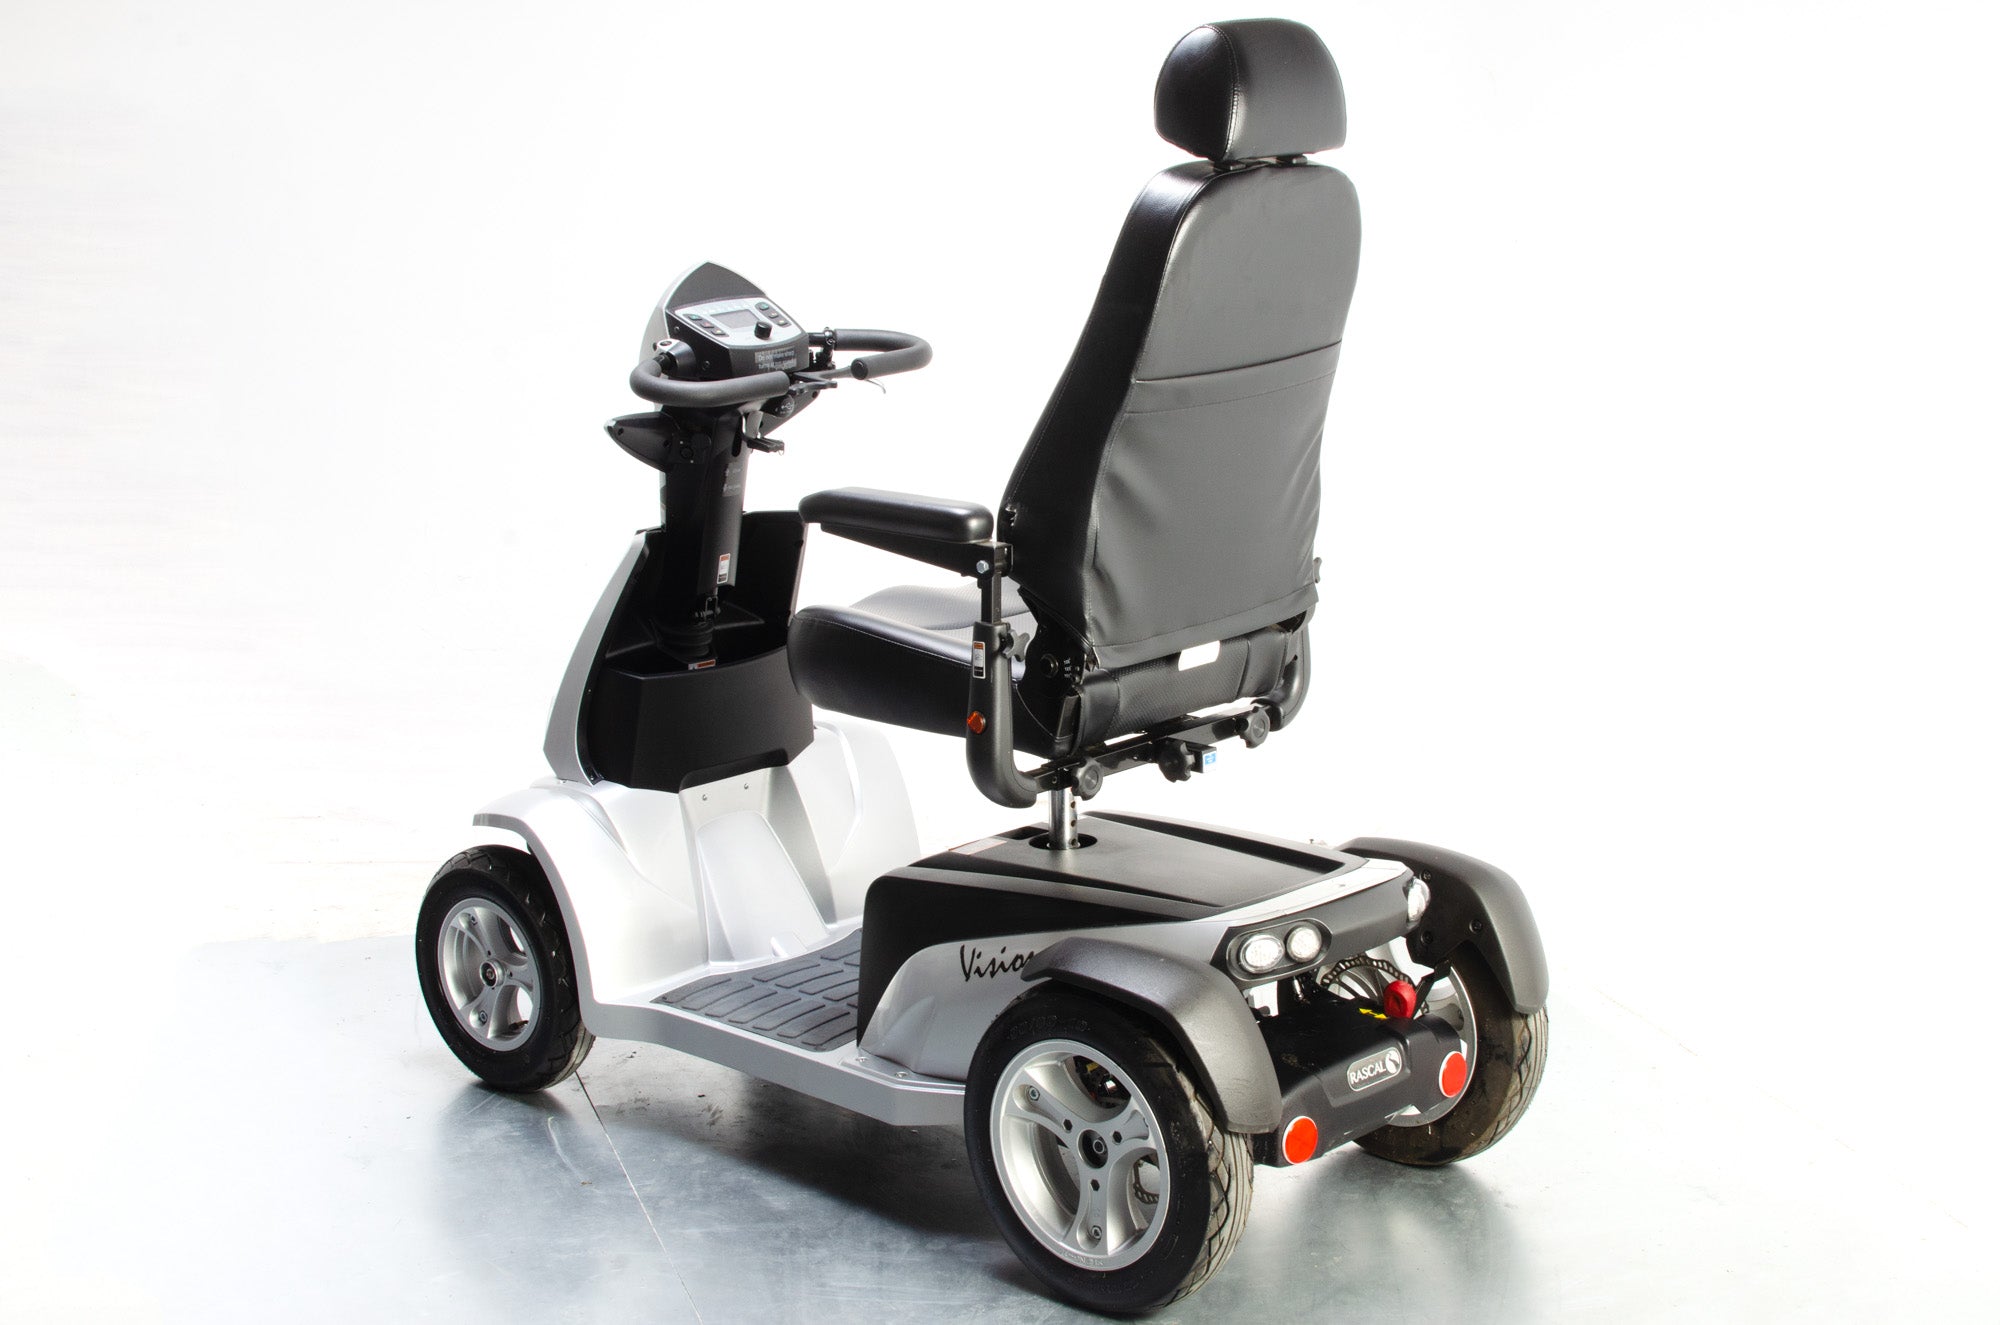 Rascal Vision Used Electric Mobility Scooter Large 8mph All-Terrain Road Legal